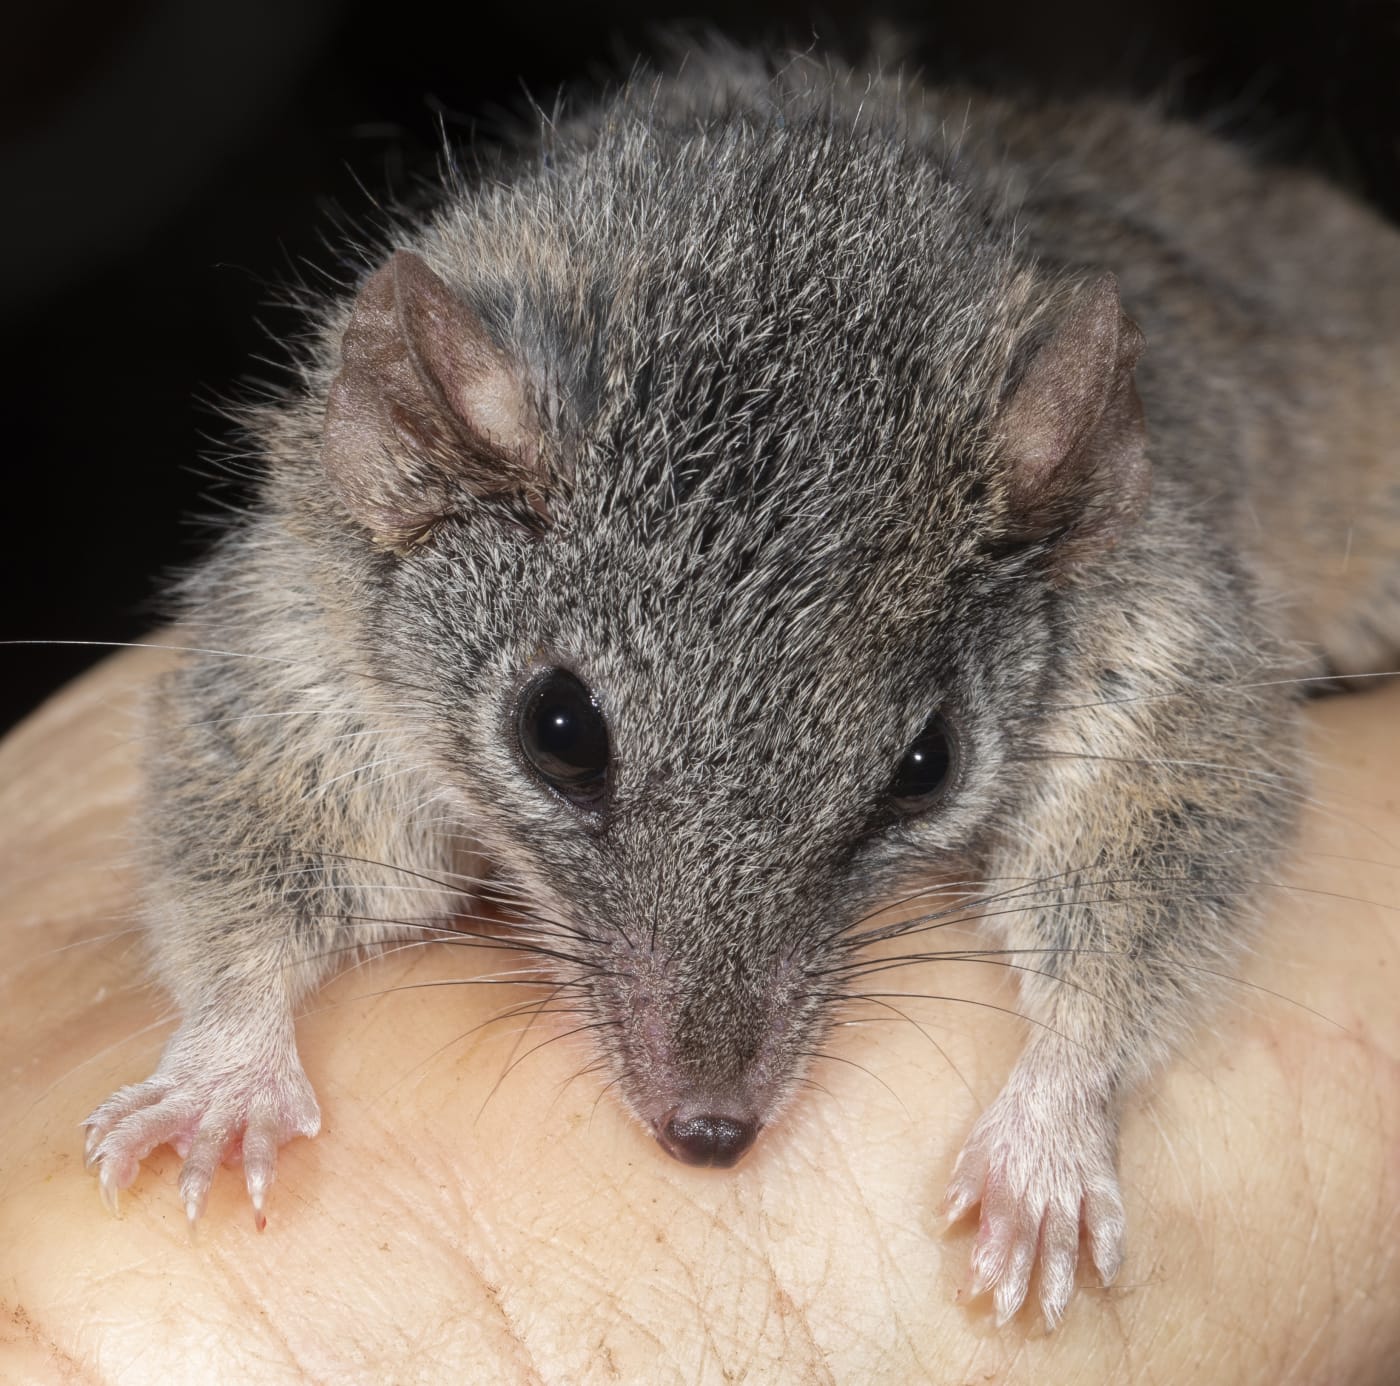 Silver-headed antechinus biting a handler during field survey work in Bulburin National Park